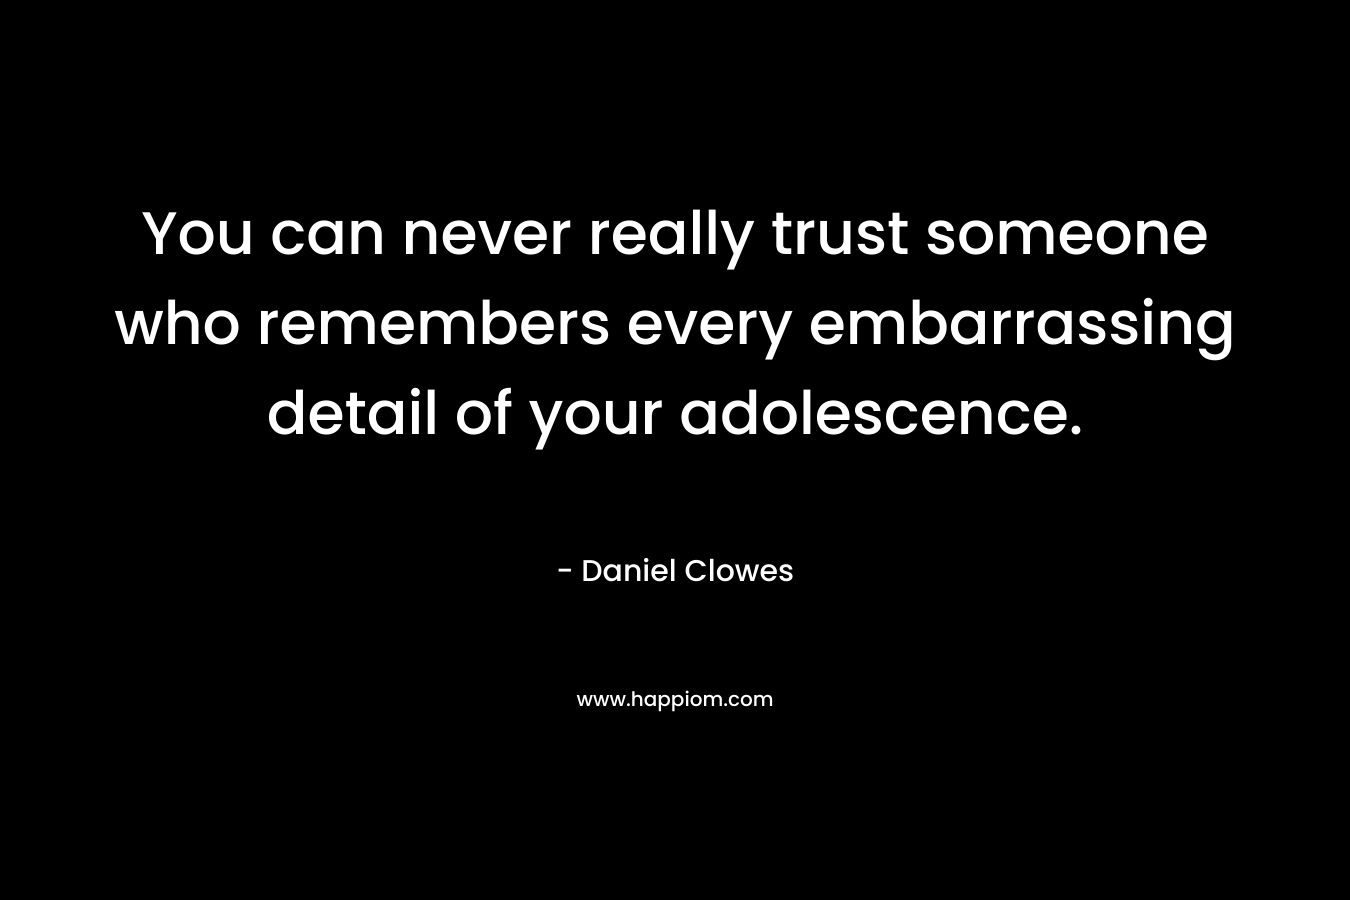 You can never really trust someone who remembers every embarrassing detail of your adolescence. – Daniel Clowes